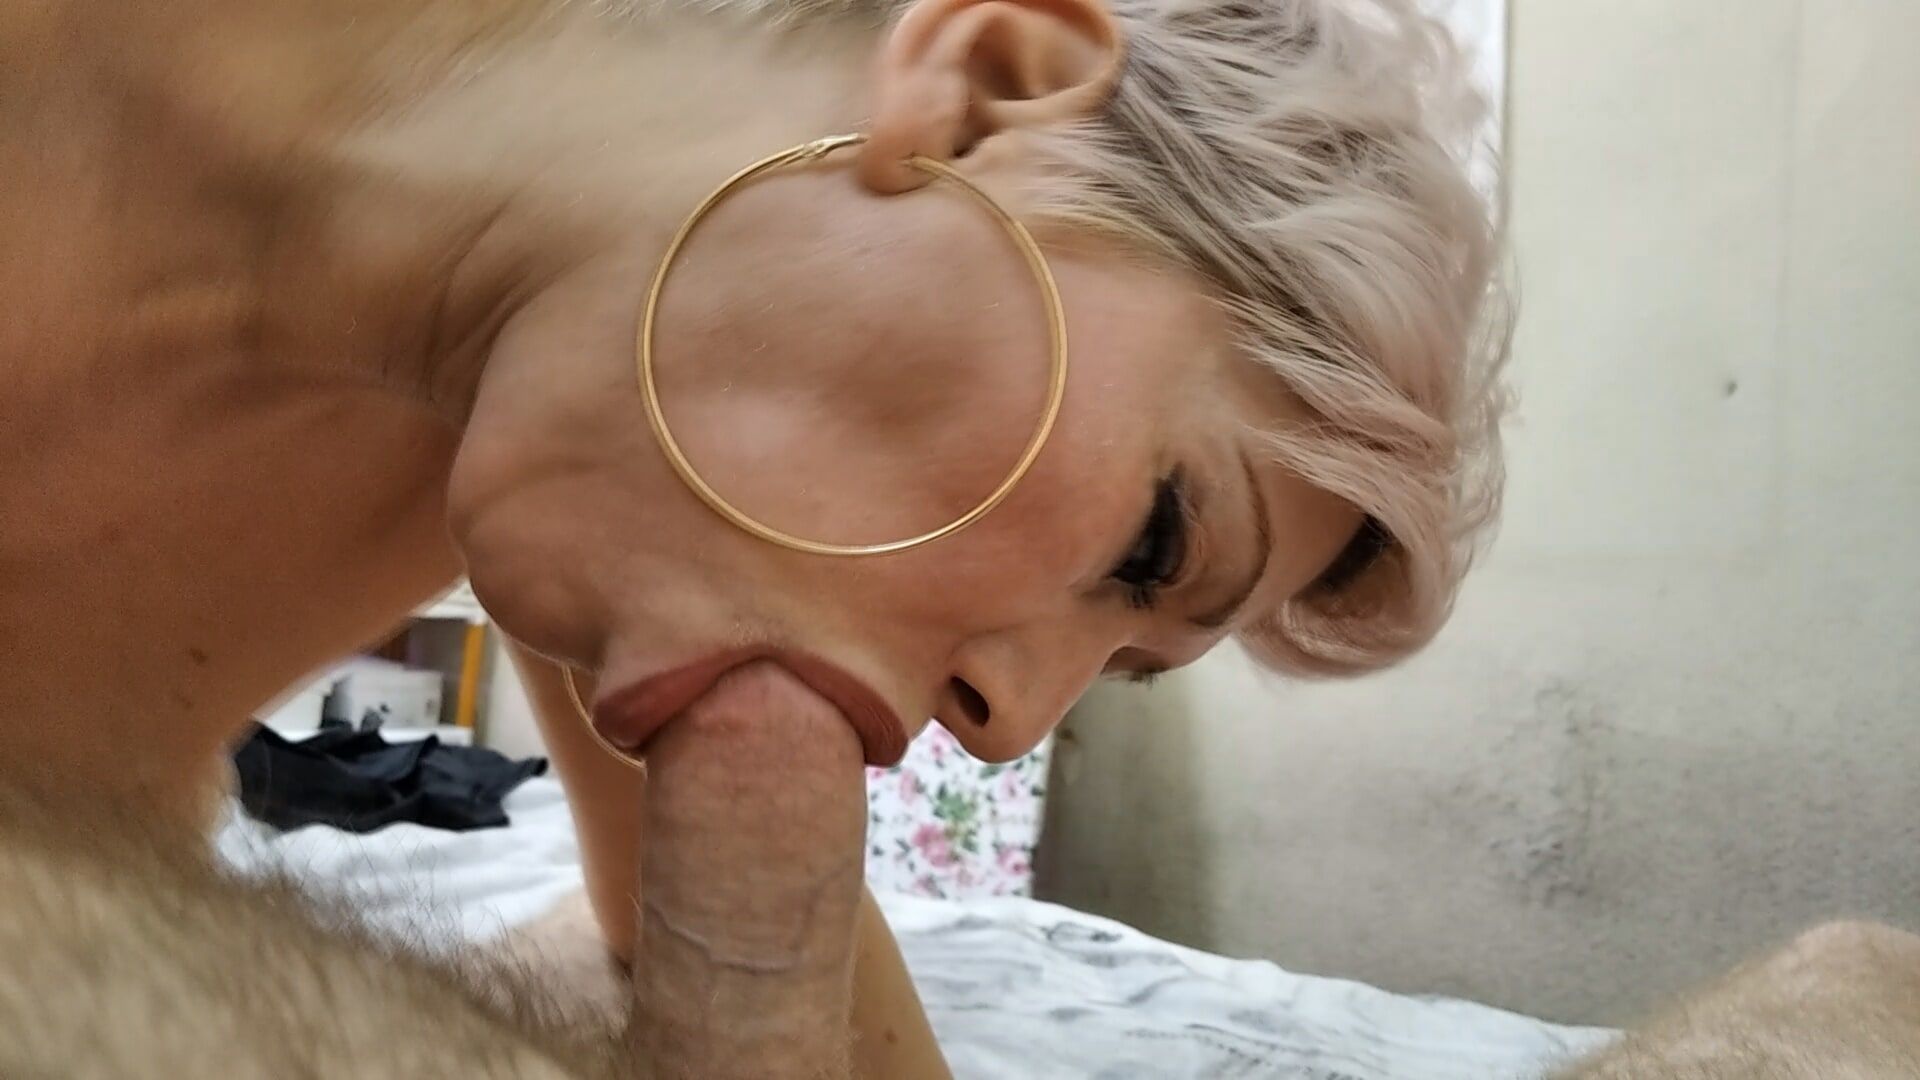 My dick is in the mouth of my favorite mature slut... ))